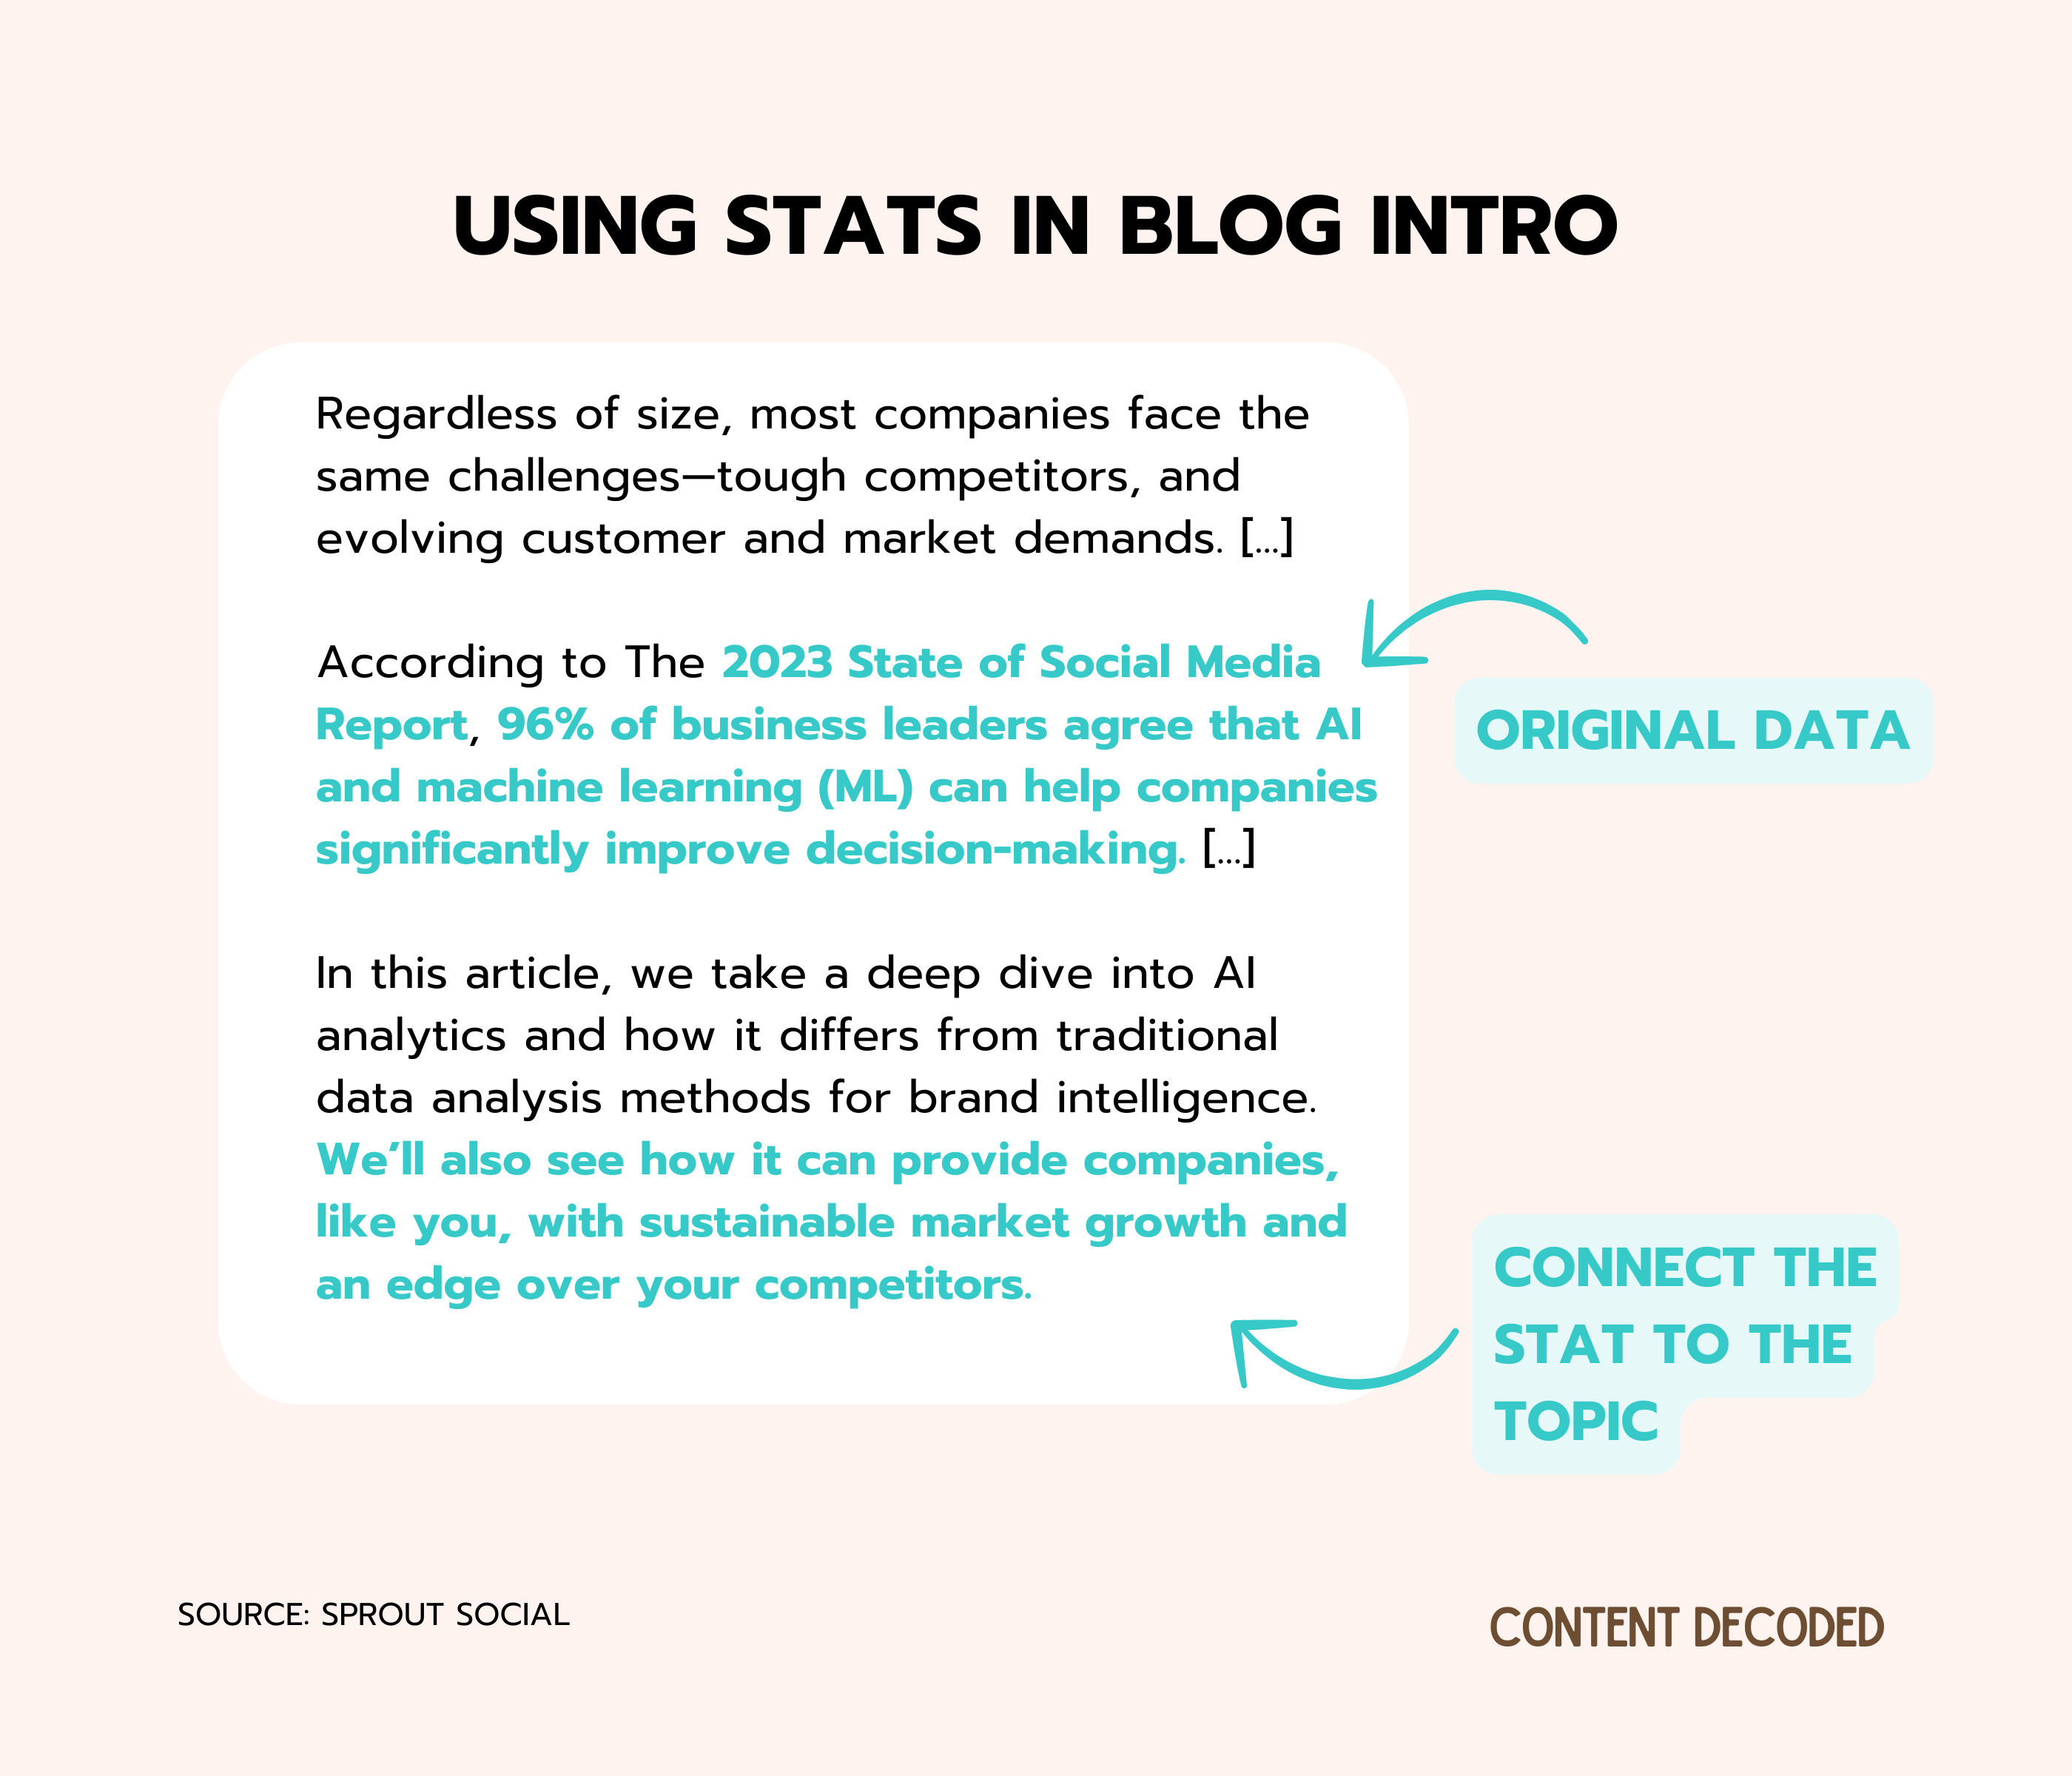 example of using stats in blog introduction from sprout social